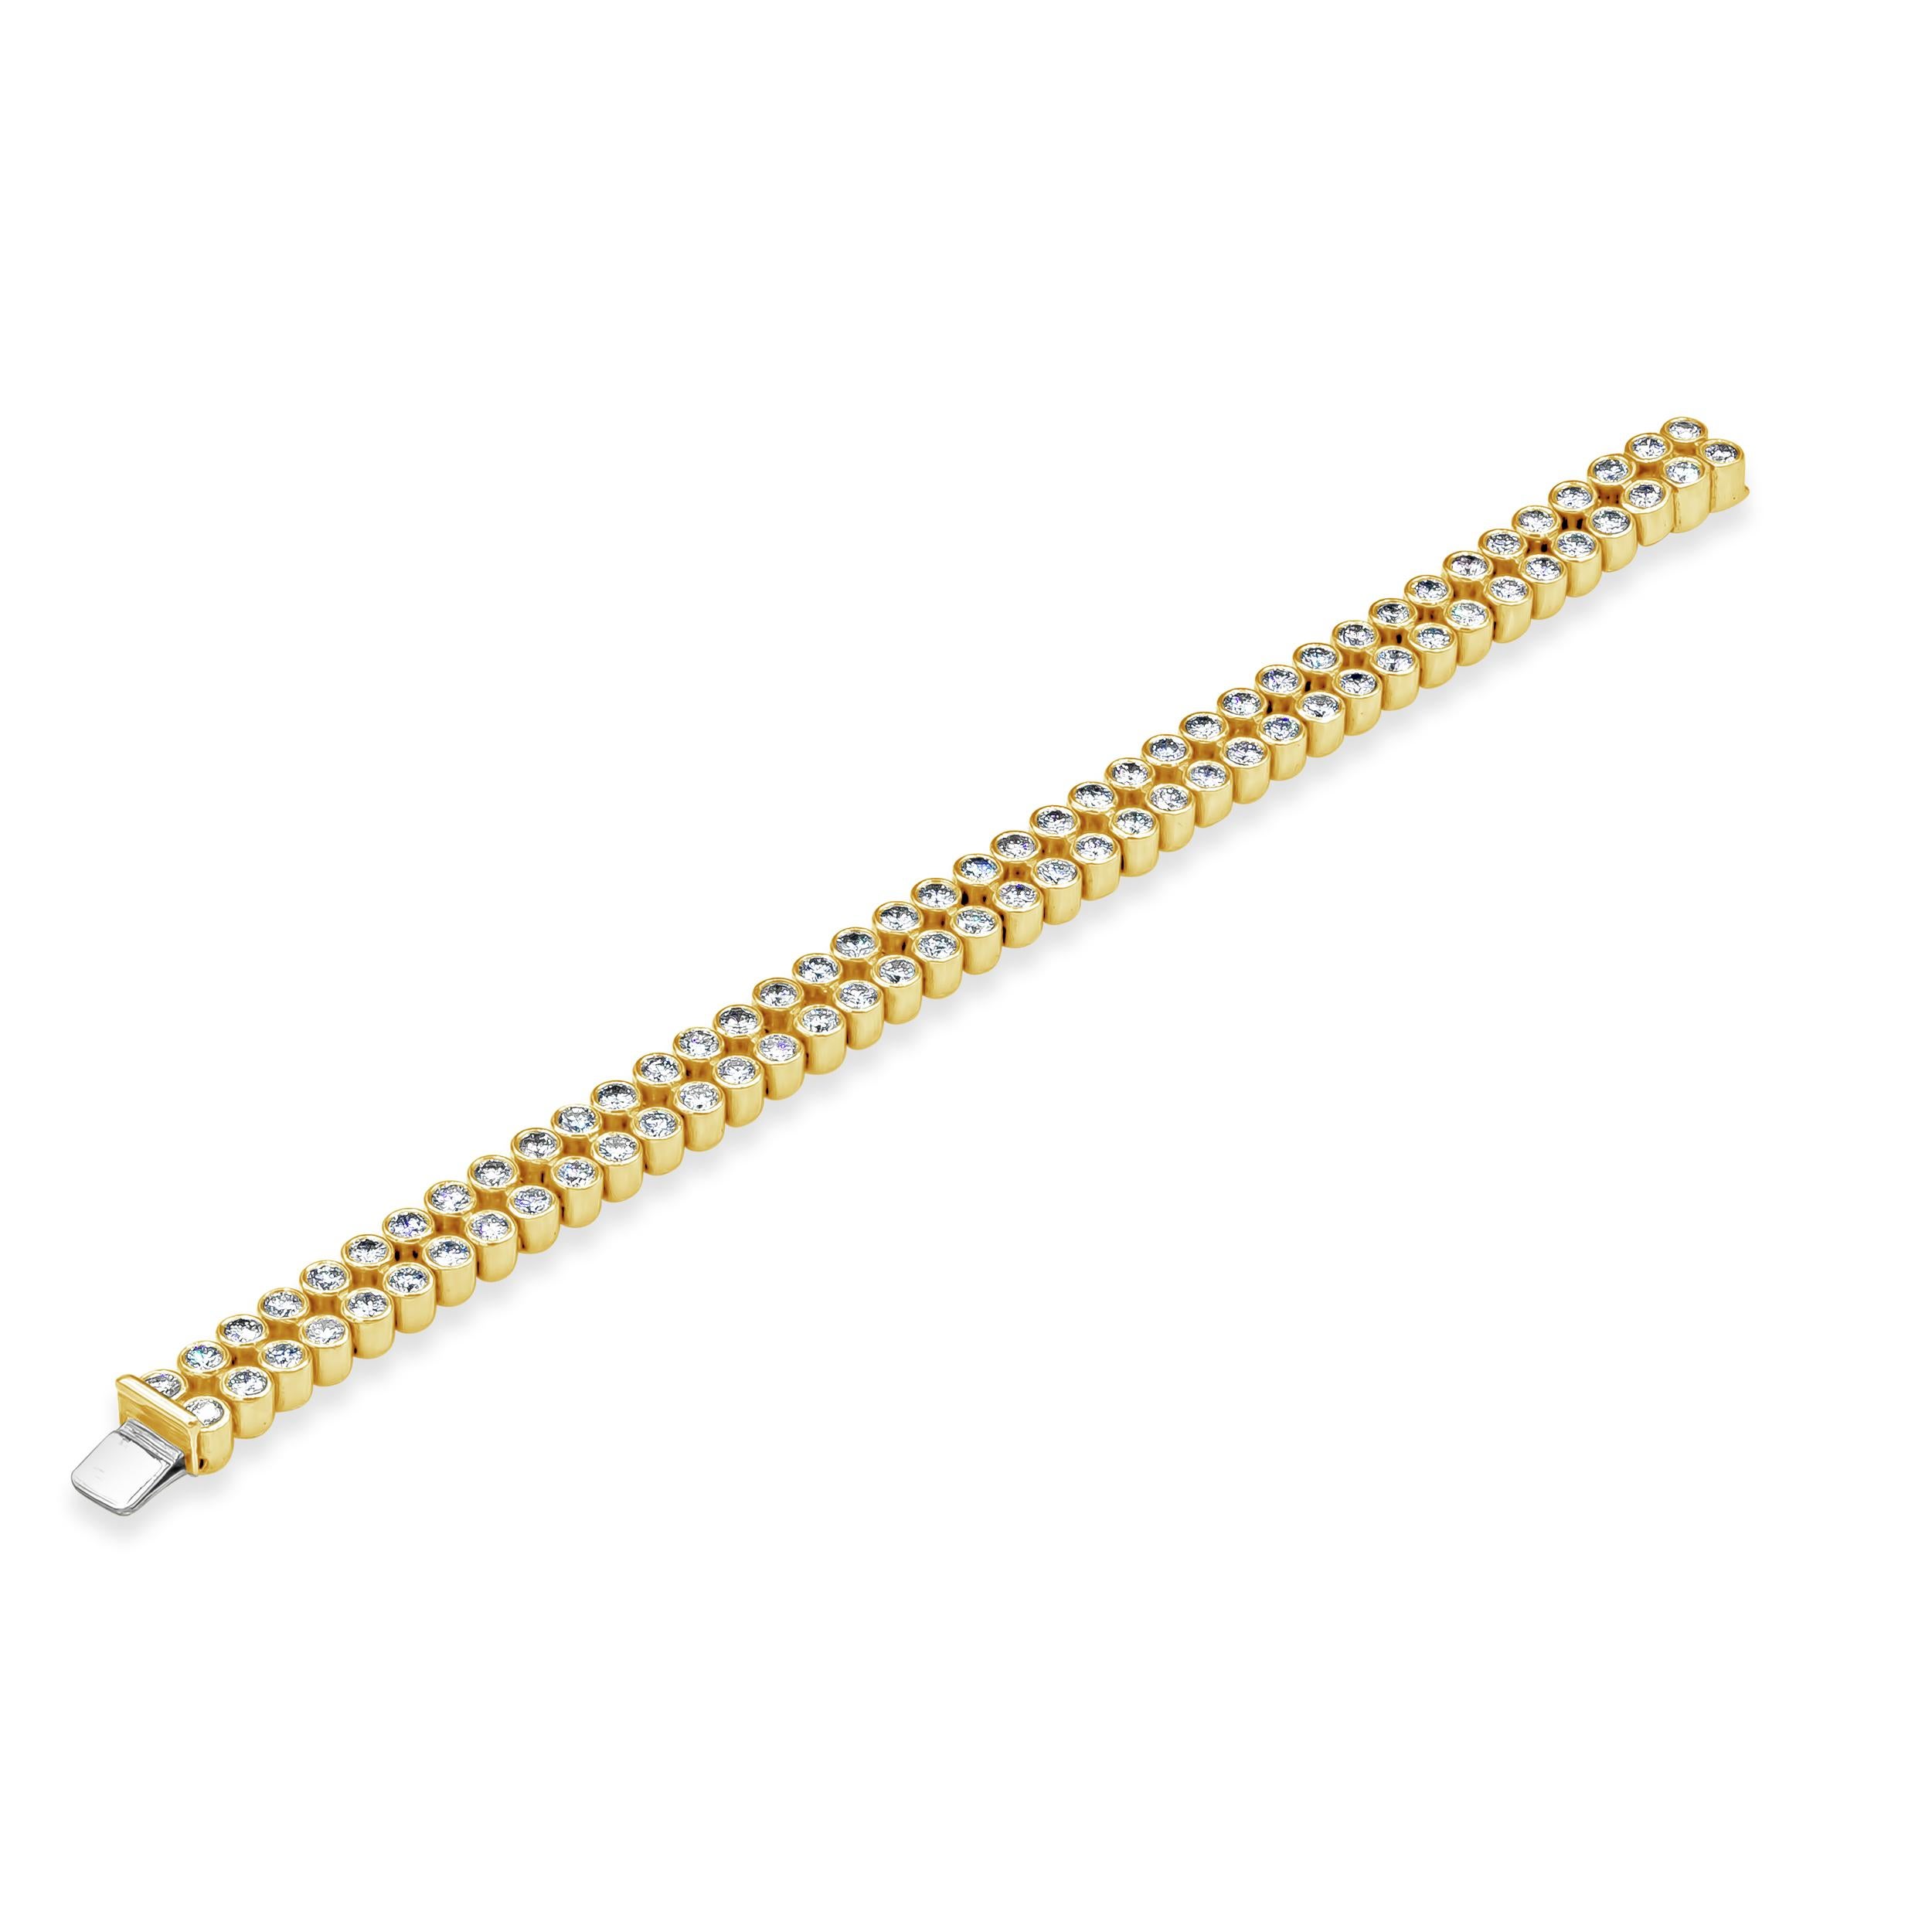 A versatile piece of jewelry perfect for everyday use showcasing two rows of round brilliant diamonds, bezel set in 18K yellow gold. Diamonds weigh 10.37 carats total. Finely made in 18K yellow gold and 7 inches in length.

Roman Malakov is a custom